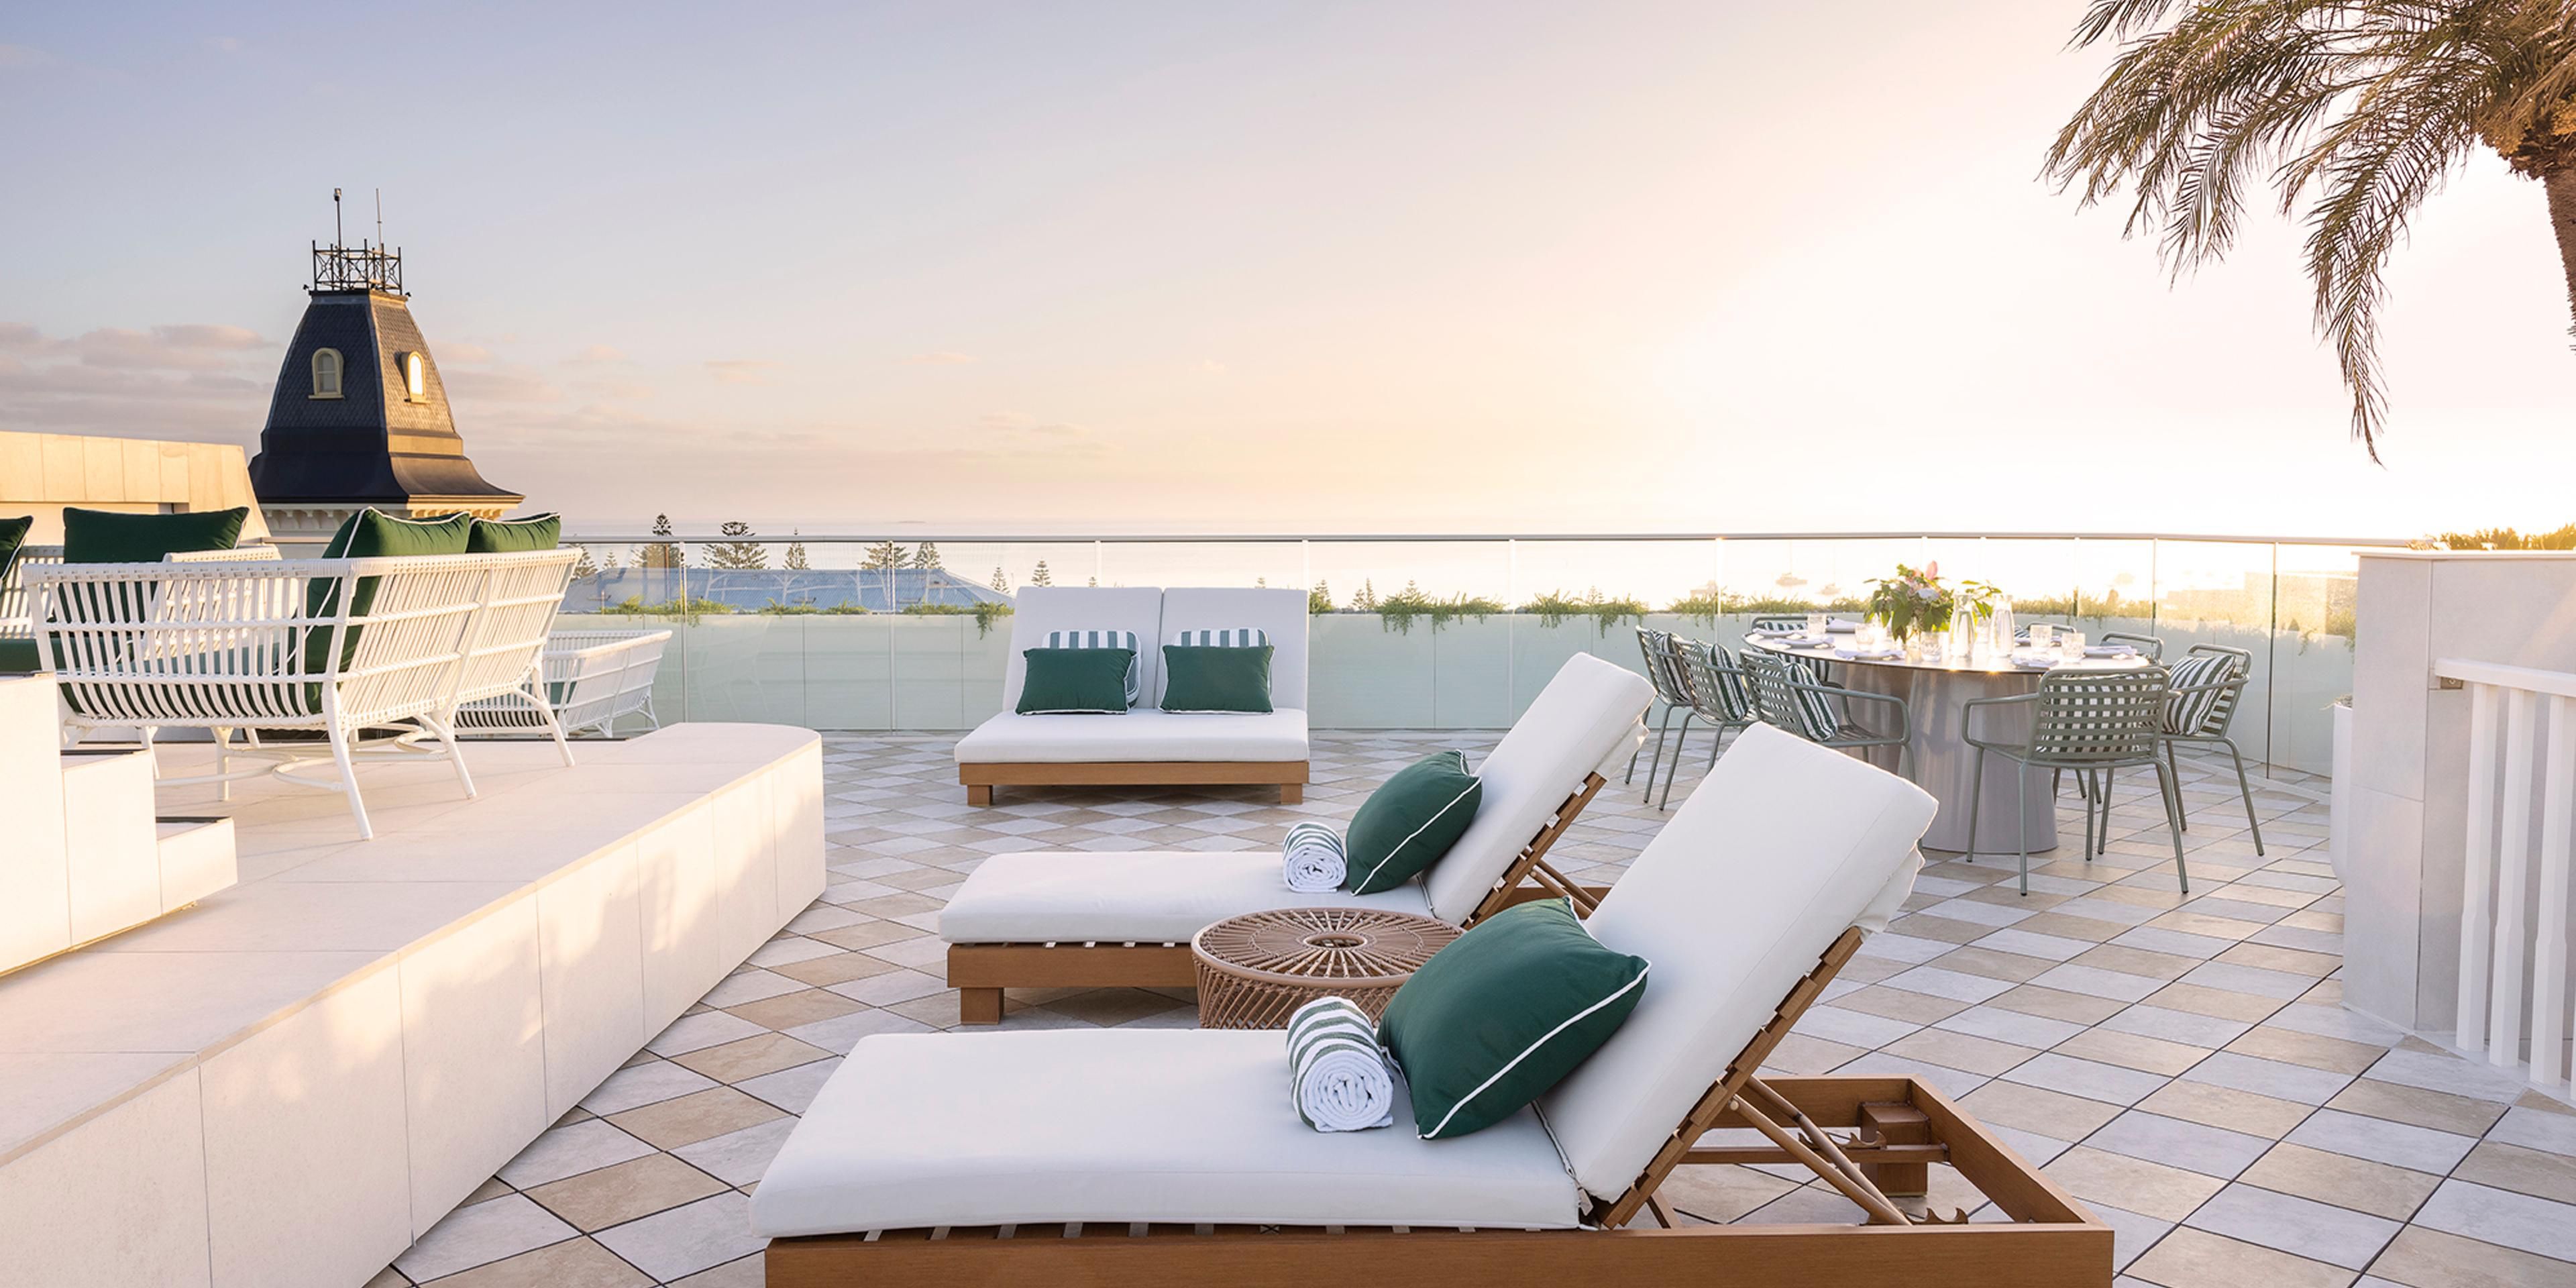 Immerse yourself in unparalleled coastal glamour. Spanning two stories and a private rooftop terrace, our Penthouse Suites offer captivating bay views, a private plunge pool, and a separate lounge and dining area.